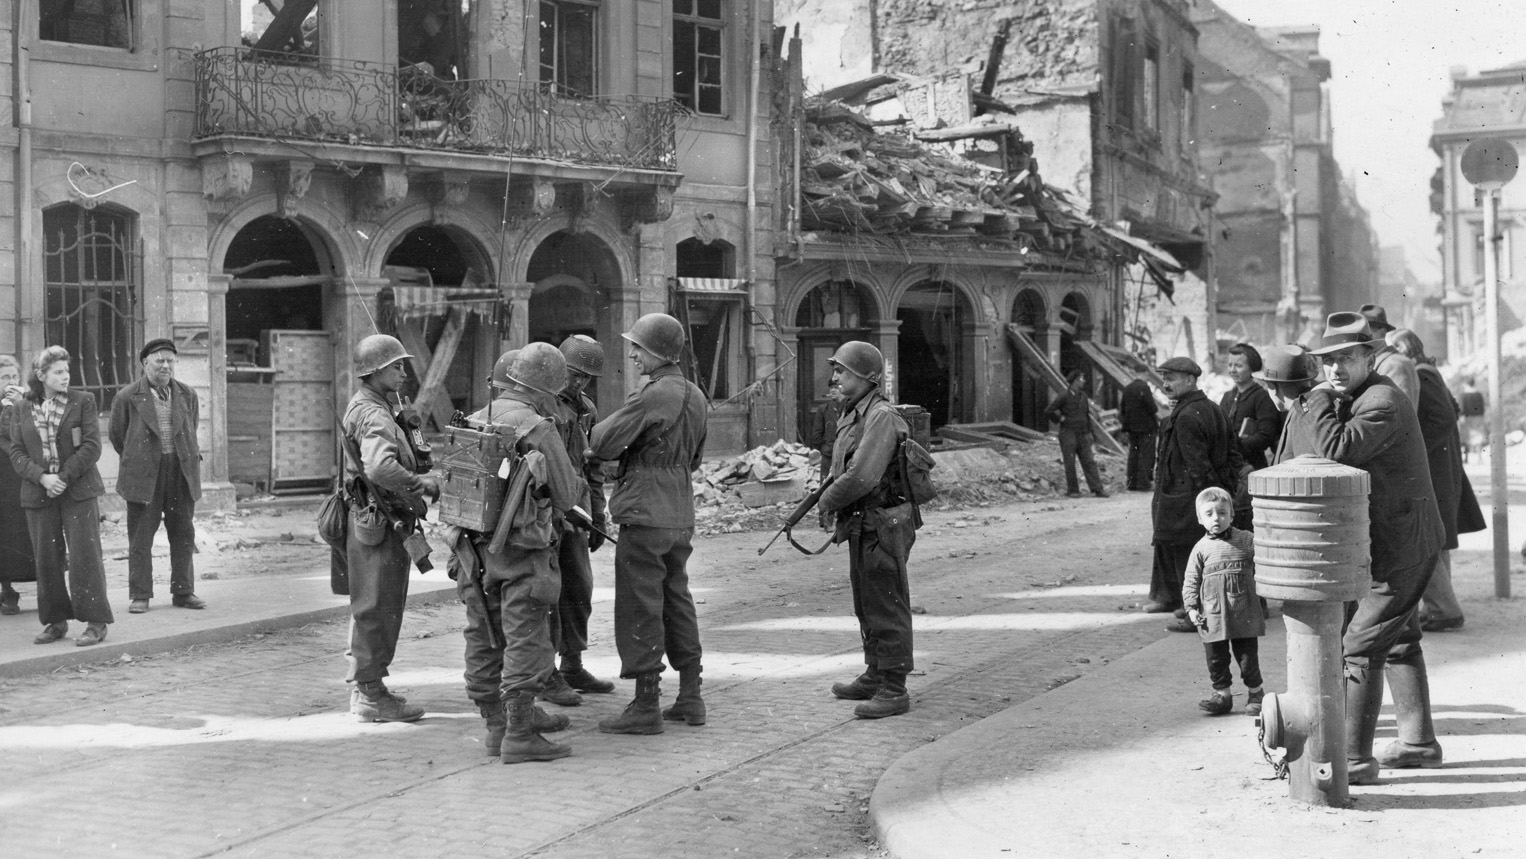 As German civilians look on, soldiers of the 90th Infantry Division’s 359th Infantry Regiment discuss their battle plans in the German city of Mainz.